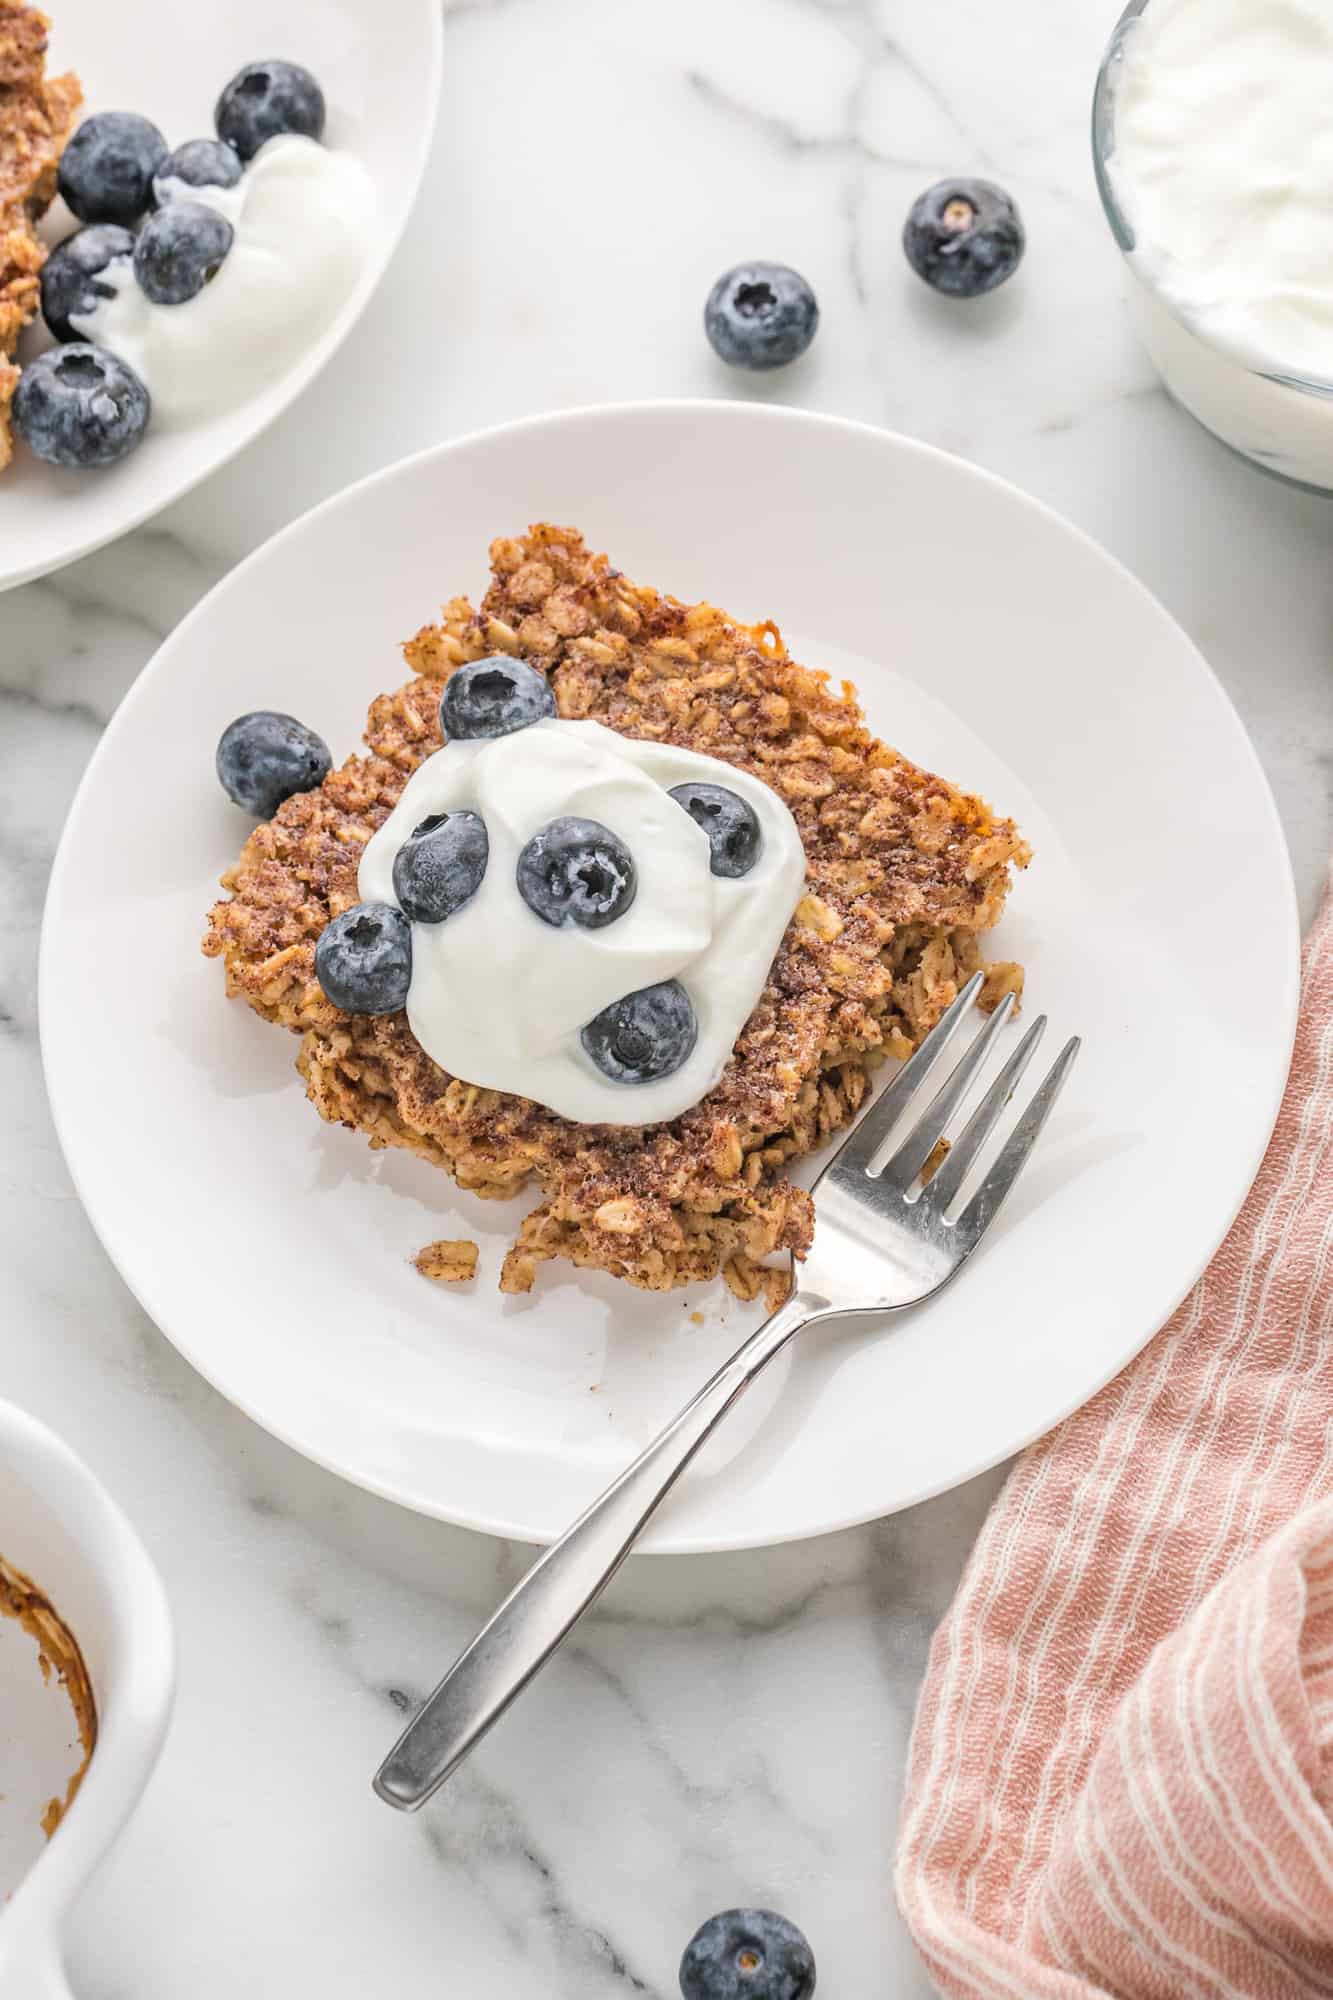 Square of baked oatmeal topped with yogurt and blueberries.